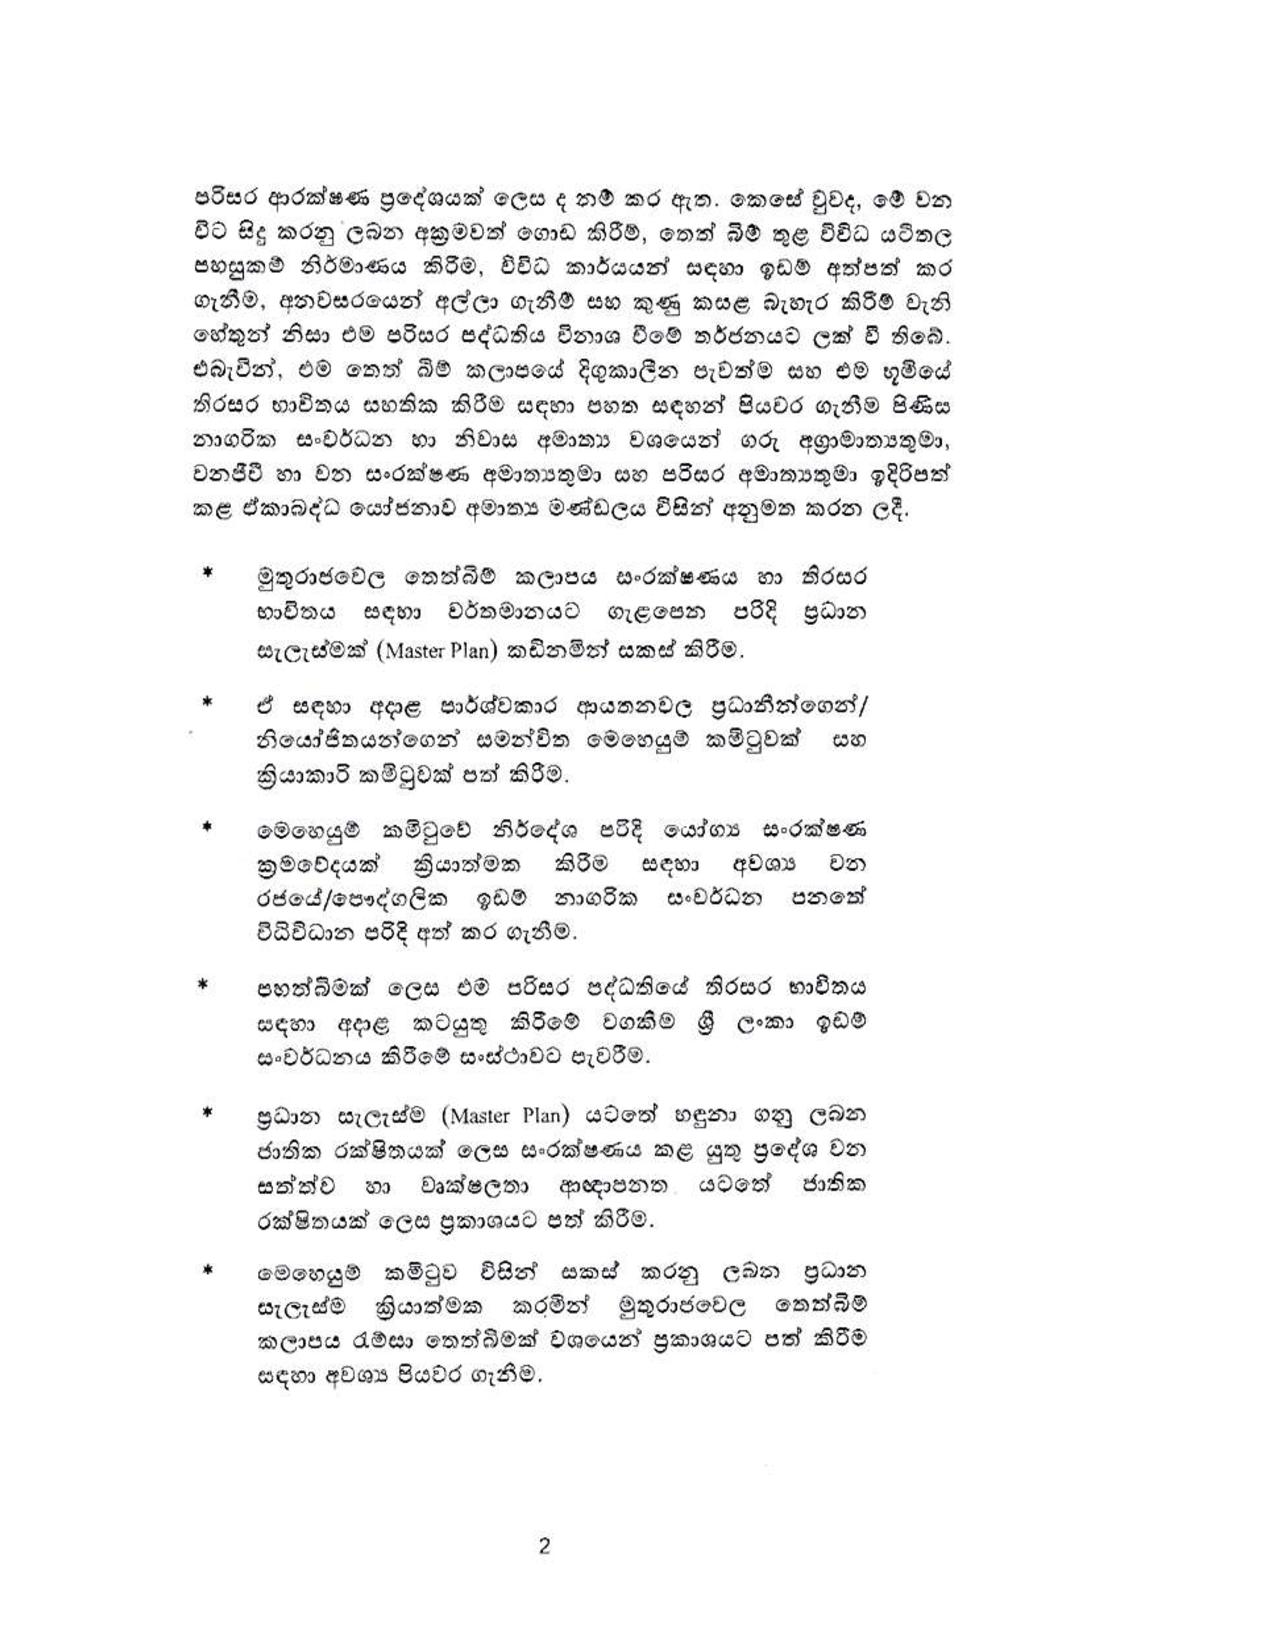 Cabinet Decision on 10.05.2021 Sinhala page 002